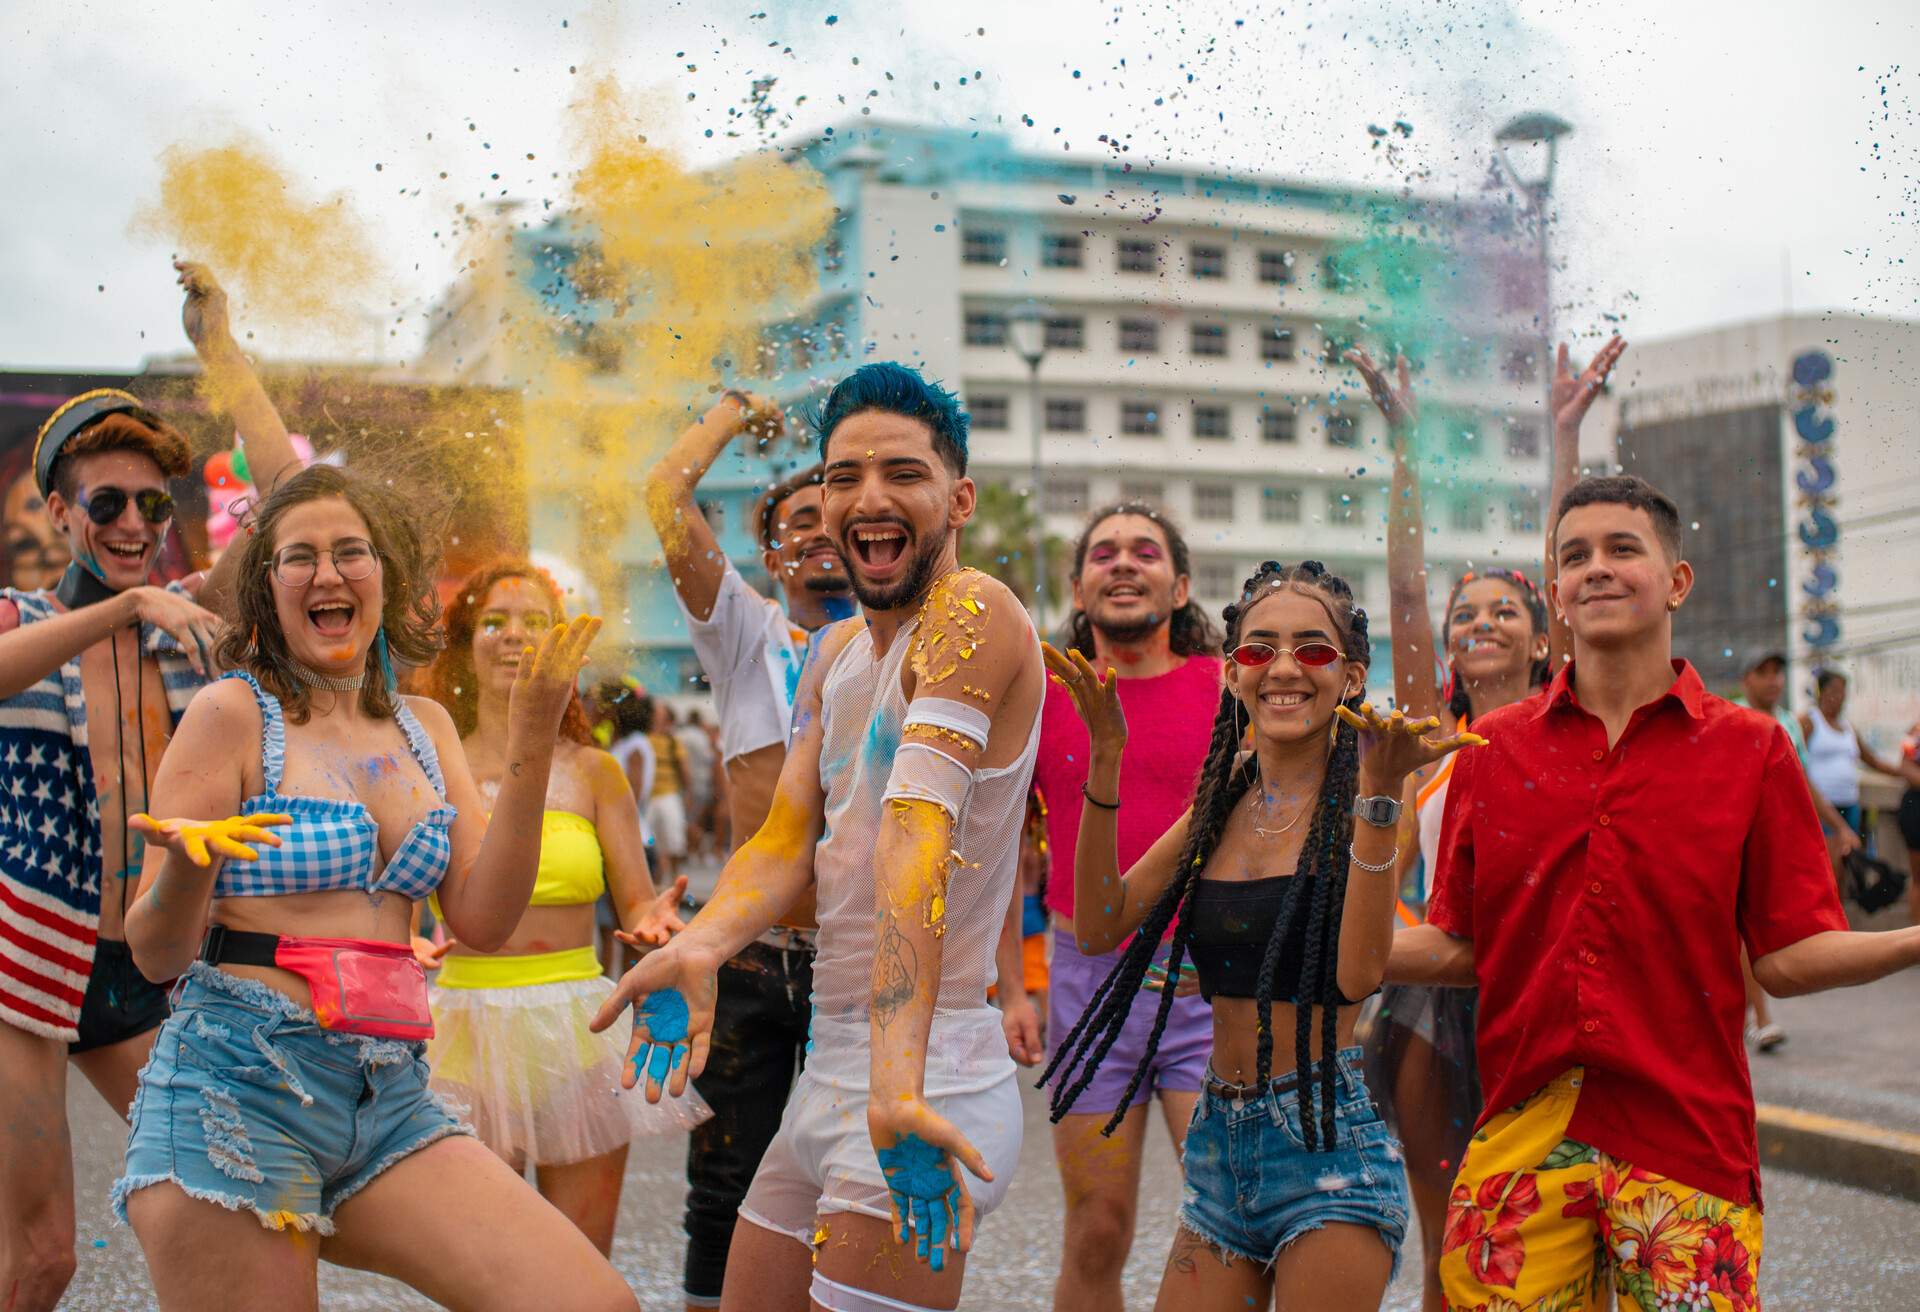 A group of young individuals in their swimwear throwing colourful confetti and powders during a festival.